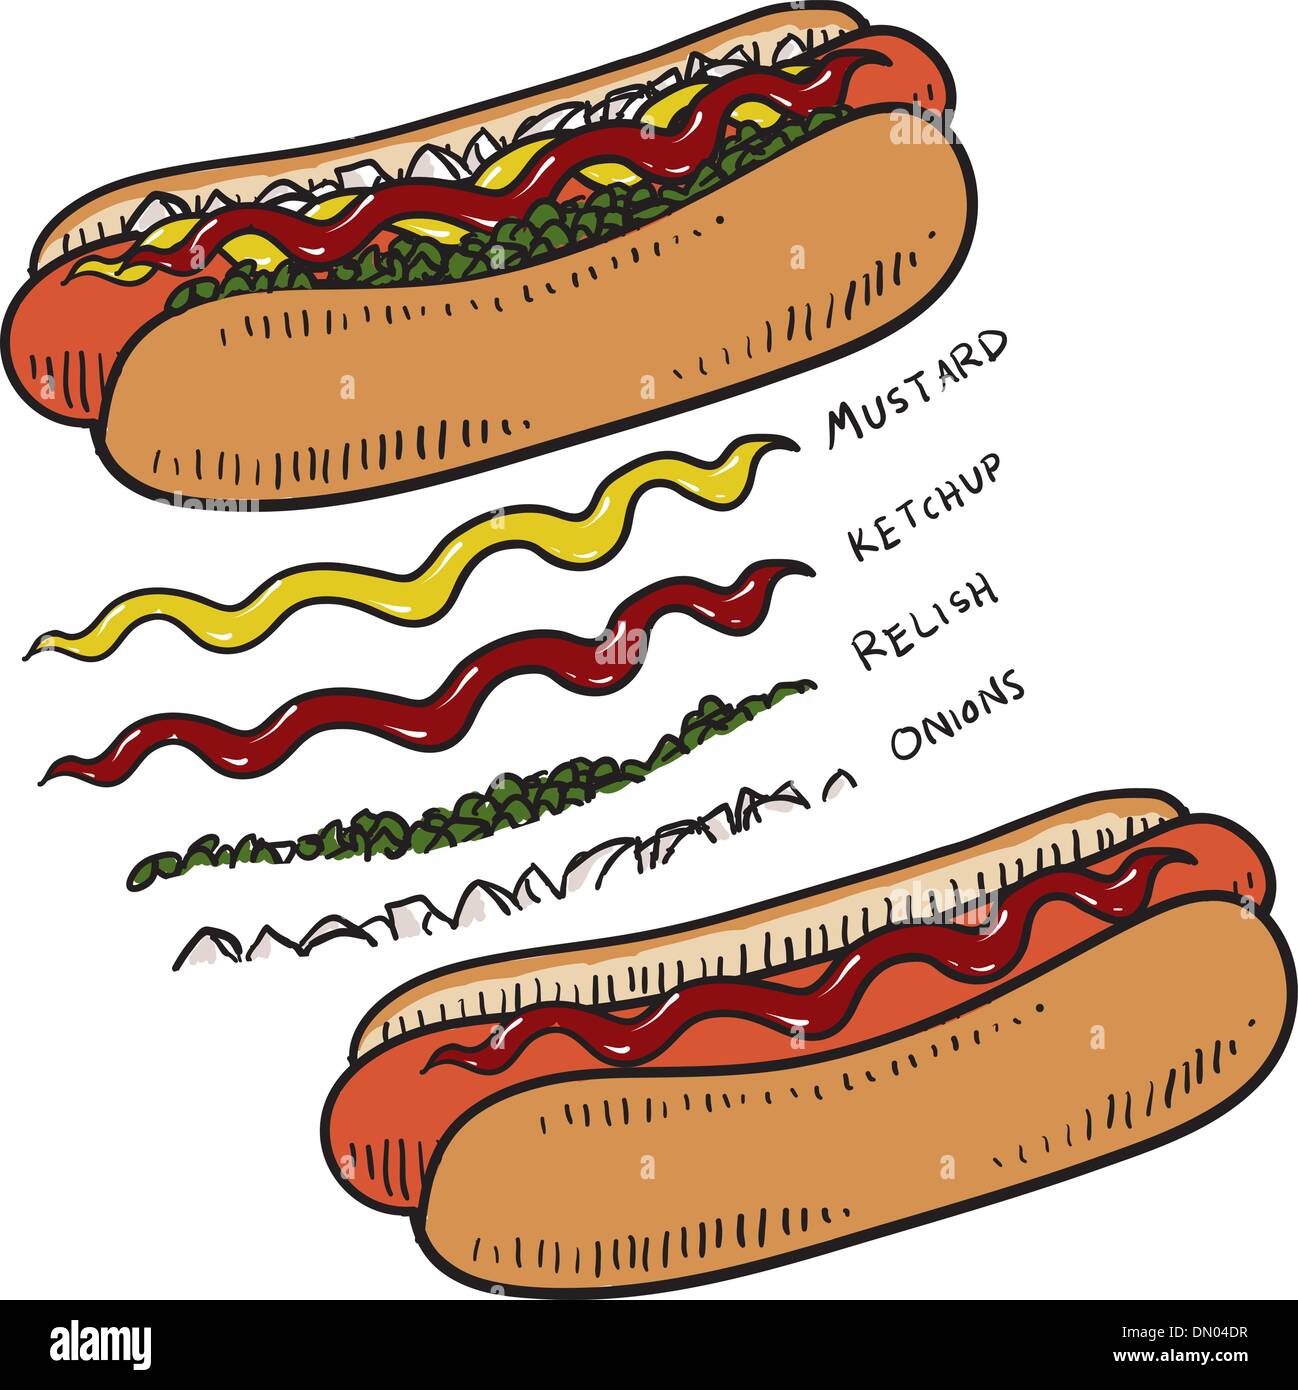 Hot dog with condiments illustration Stock Vector